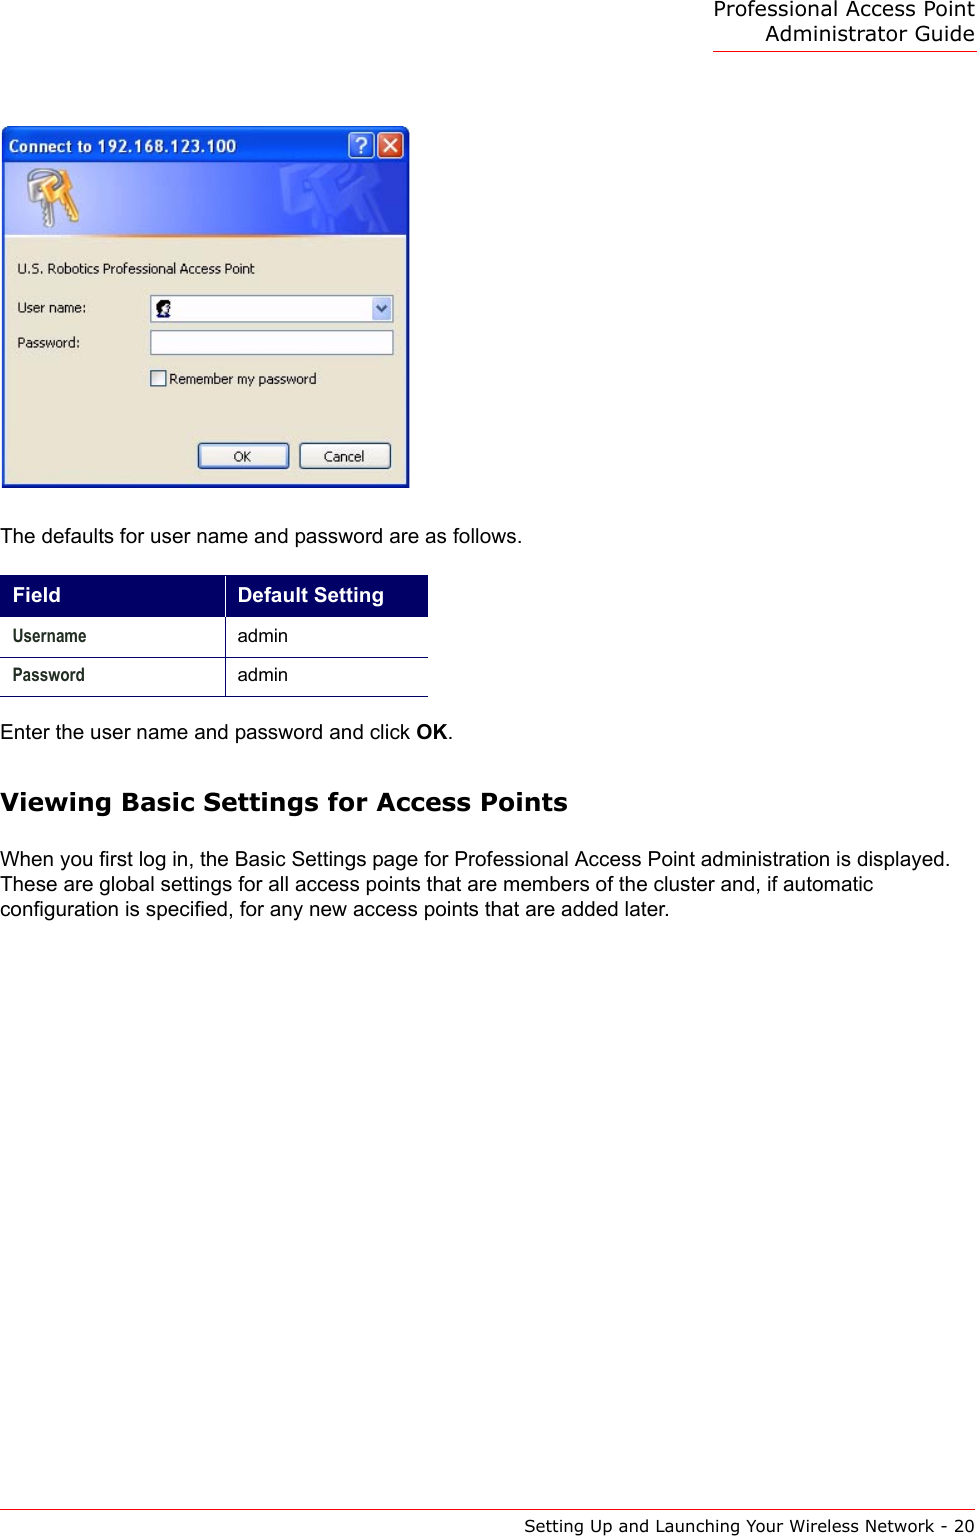 Professional Access Point Administrator GuideSetting Up and Launching Your Wireless Network - 20The defaults for user name and password are as follows.Enter the user name and password and click OK.Viewing Basic Settings for Access PointsWhen you first log in, the Basic Settings page for Professional Access Point administration is displayed. These are global settings for all access points that are members of the cluster and, if automatic configuration is specified, for any new access points that are added later.Field Default SettingUsername adminPassword admin